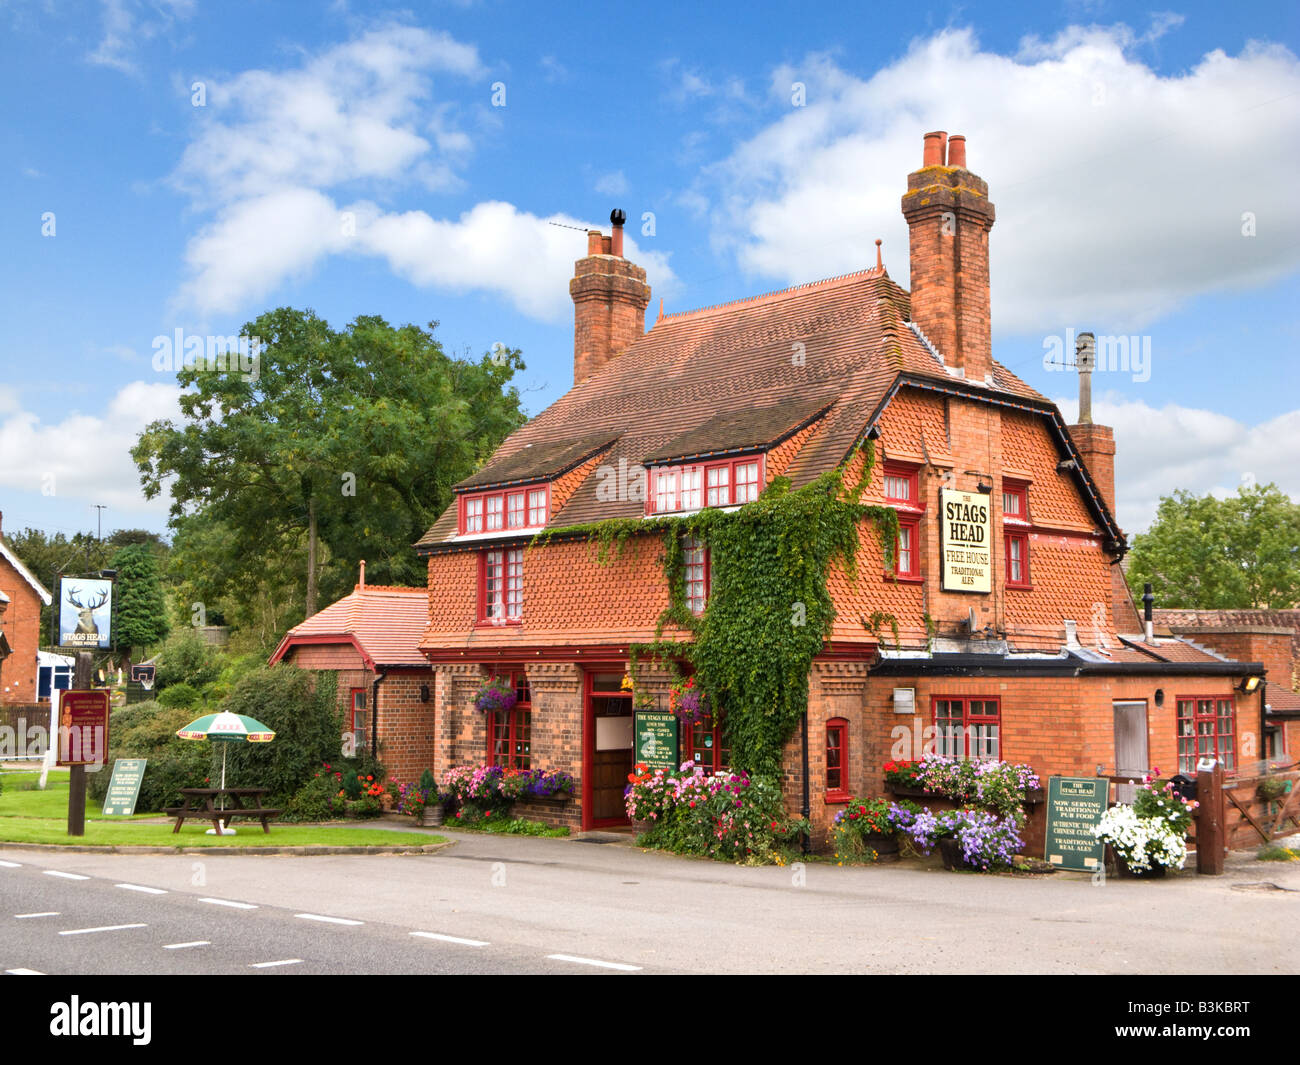 Traditional English Pub in Burwell, Lincolnshire, England UK - The Stags Head country pub Stock Photo